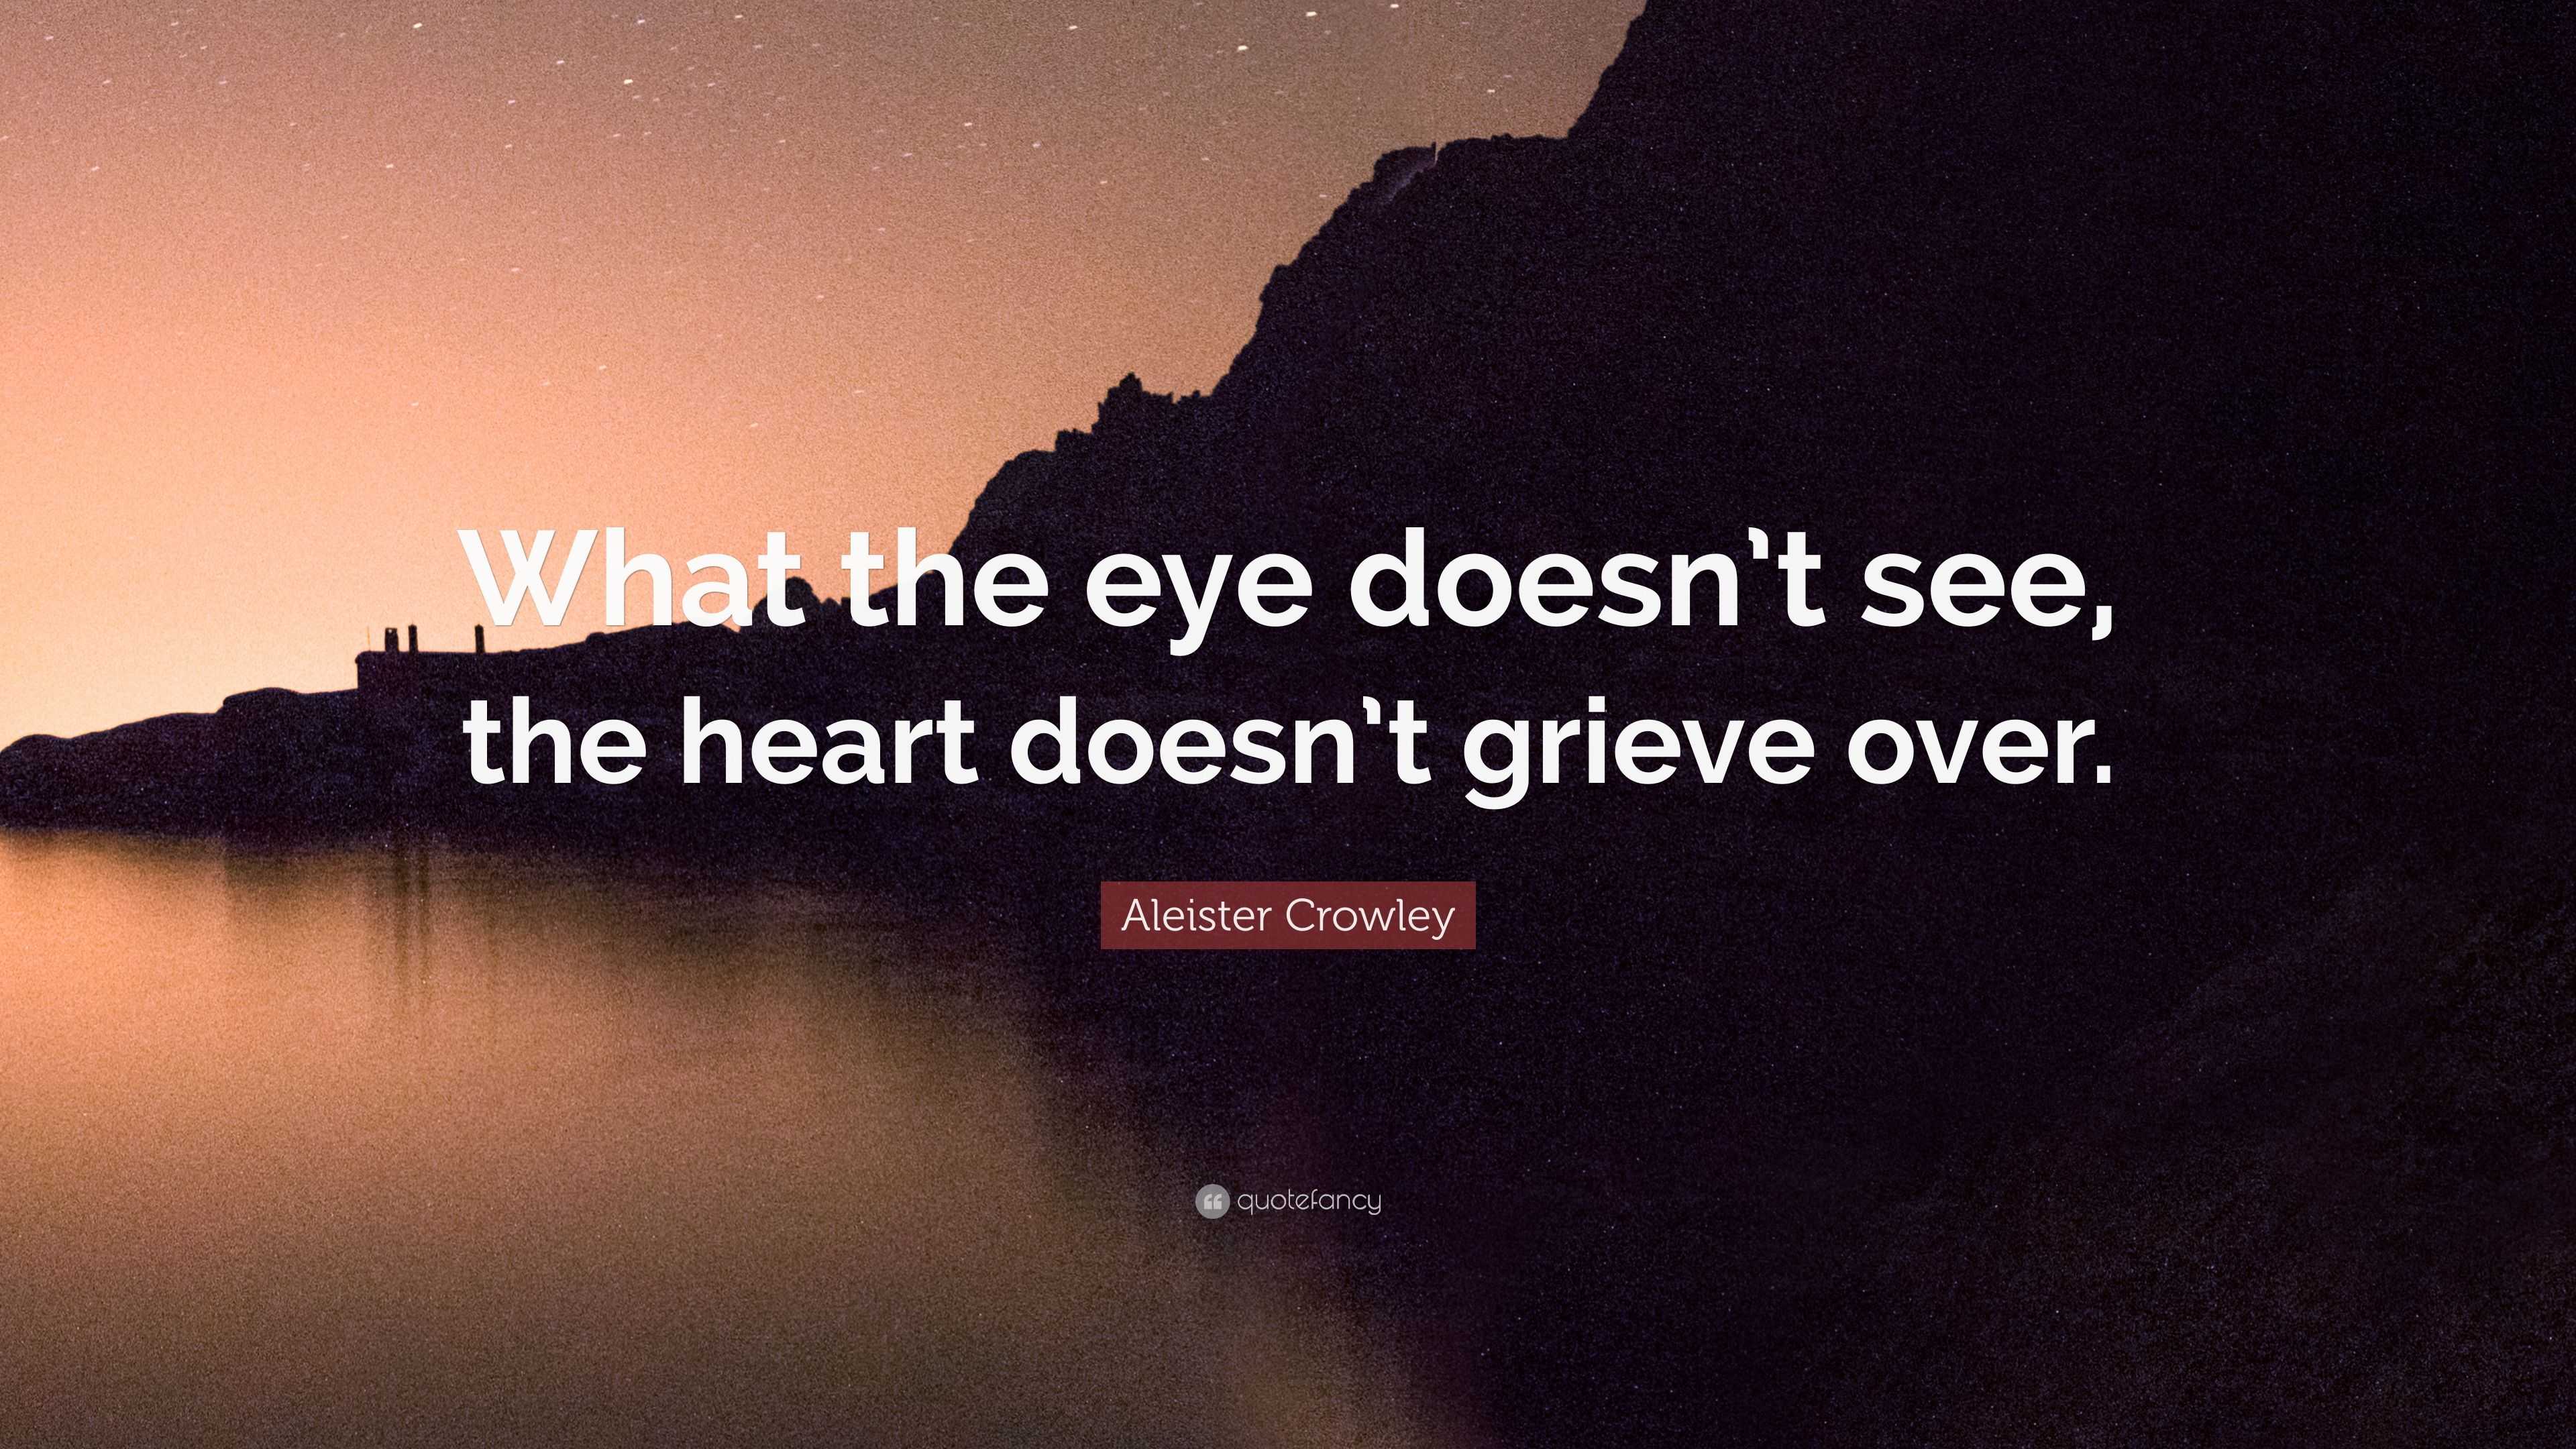 Aleister Crowley Quote: “What the eye doesn’t see, the heart doesn’t ...